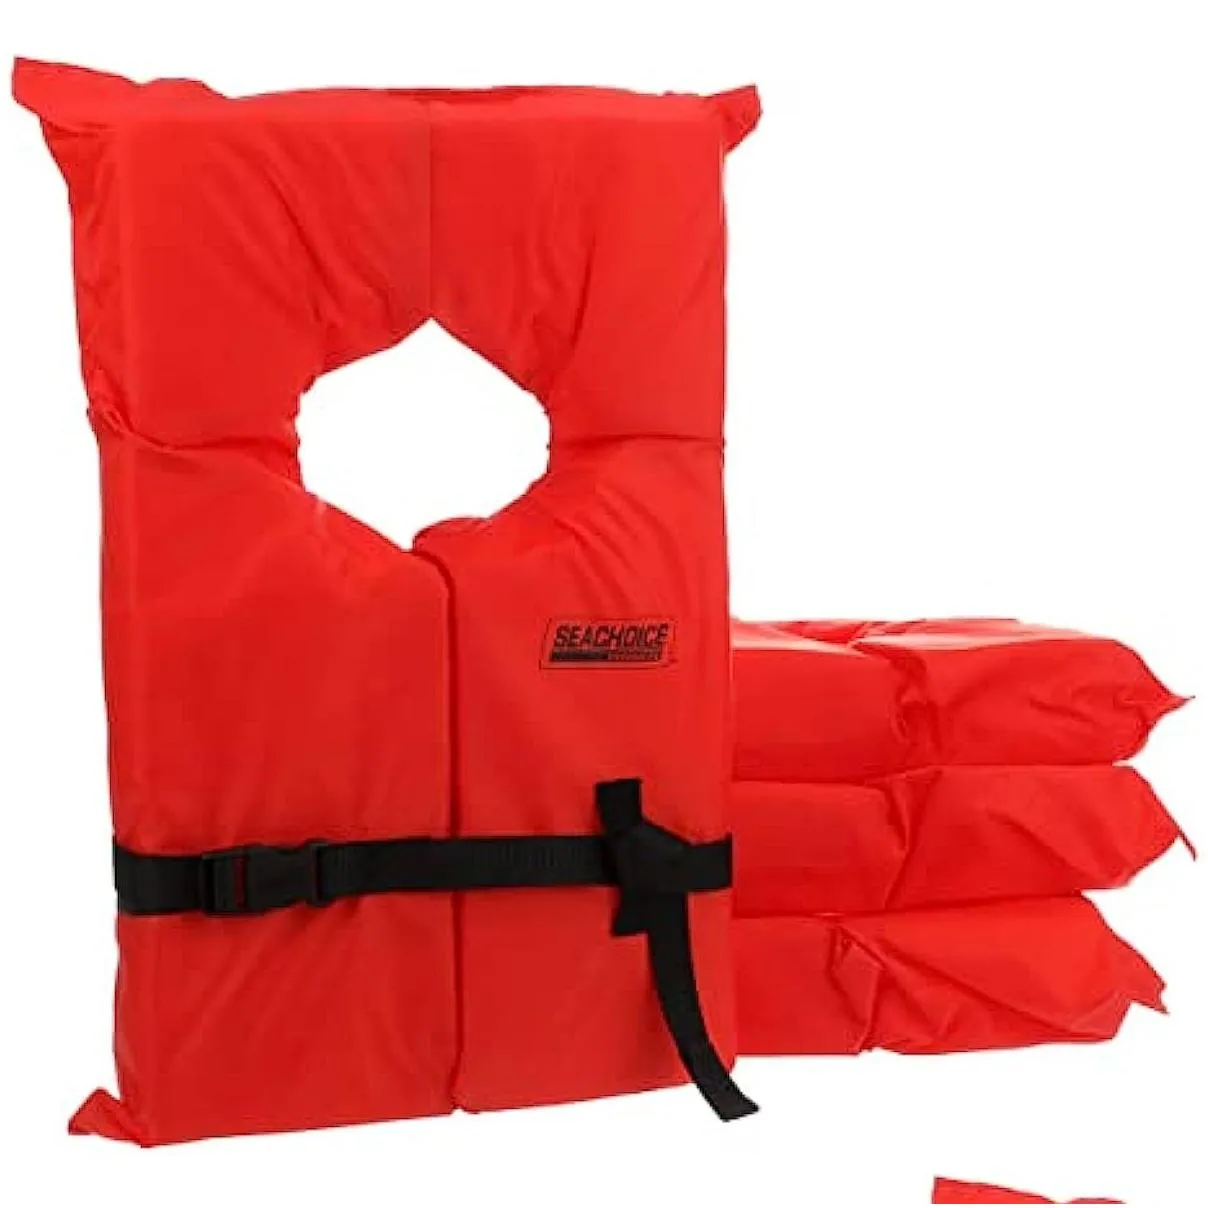 Life Vest & Buoy Seachoice Life Vest Type Ii Personal Flotation Device - Uscg Appd Mtiple Sizes And Colors Drop Delivery Sports Outdoo Dhobg